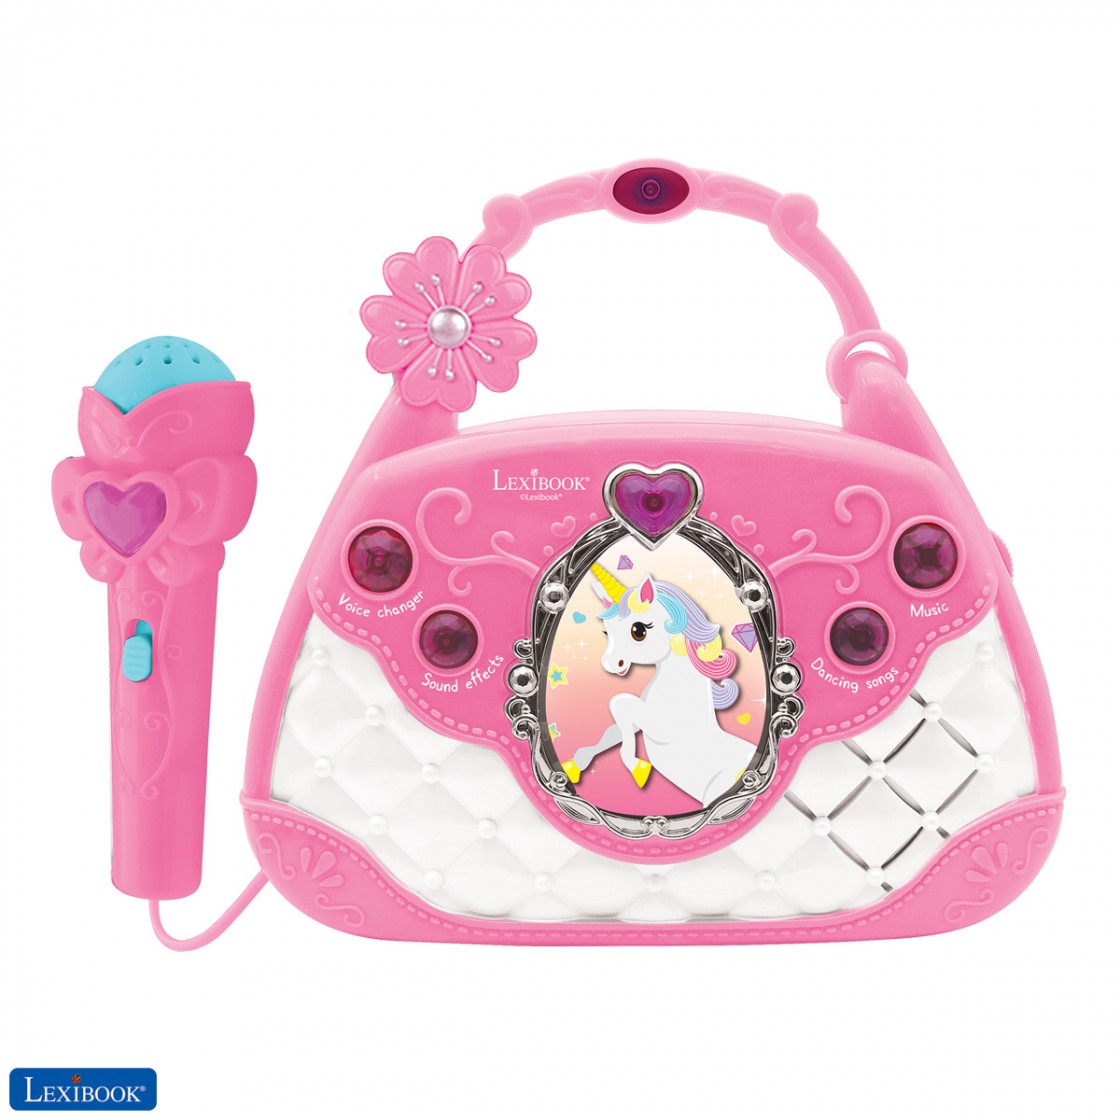 Lexibook Unicorn - Portable karaoke digital player for kids – Microphones,  Light effects, Bluetooth, Record and voice changer functions, Rechargeable  battery, Pink, MP320UNIZ 